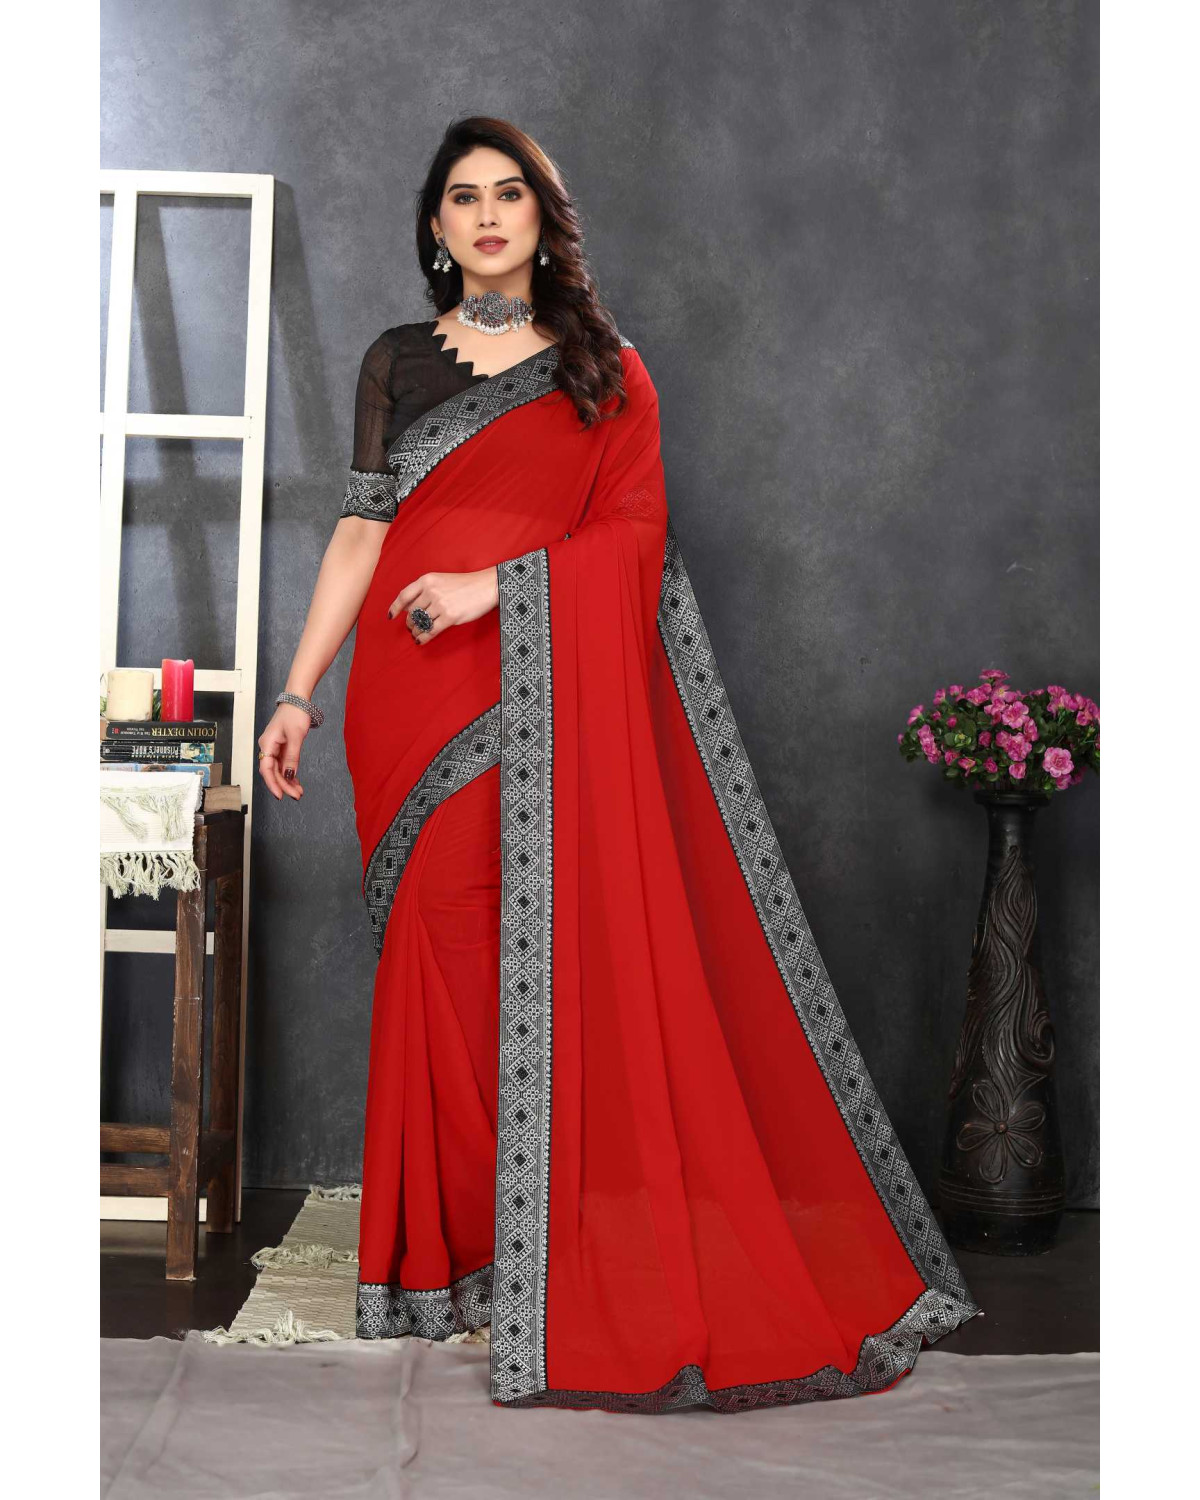 Red And Maroon Sarees  Plain Red Sarees With Black Border